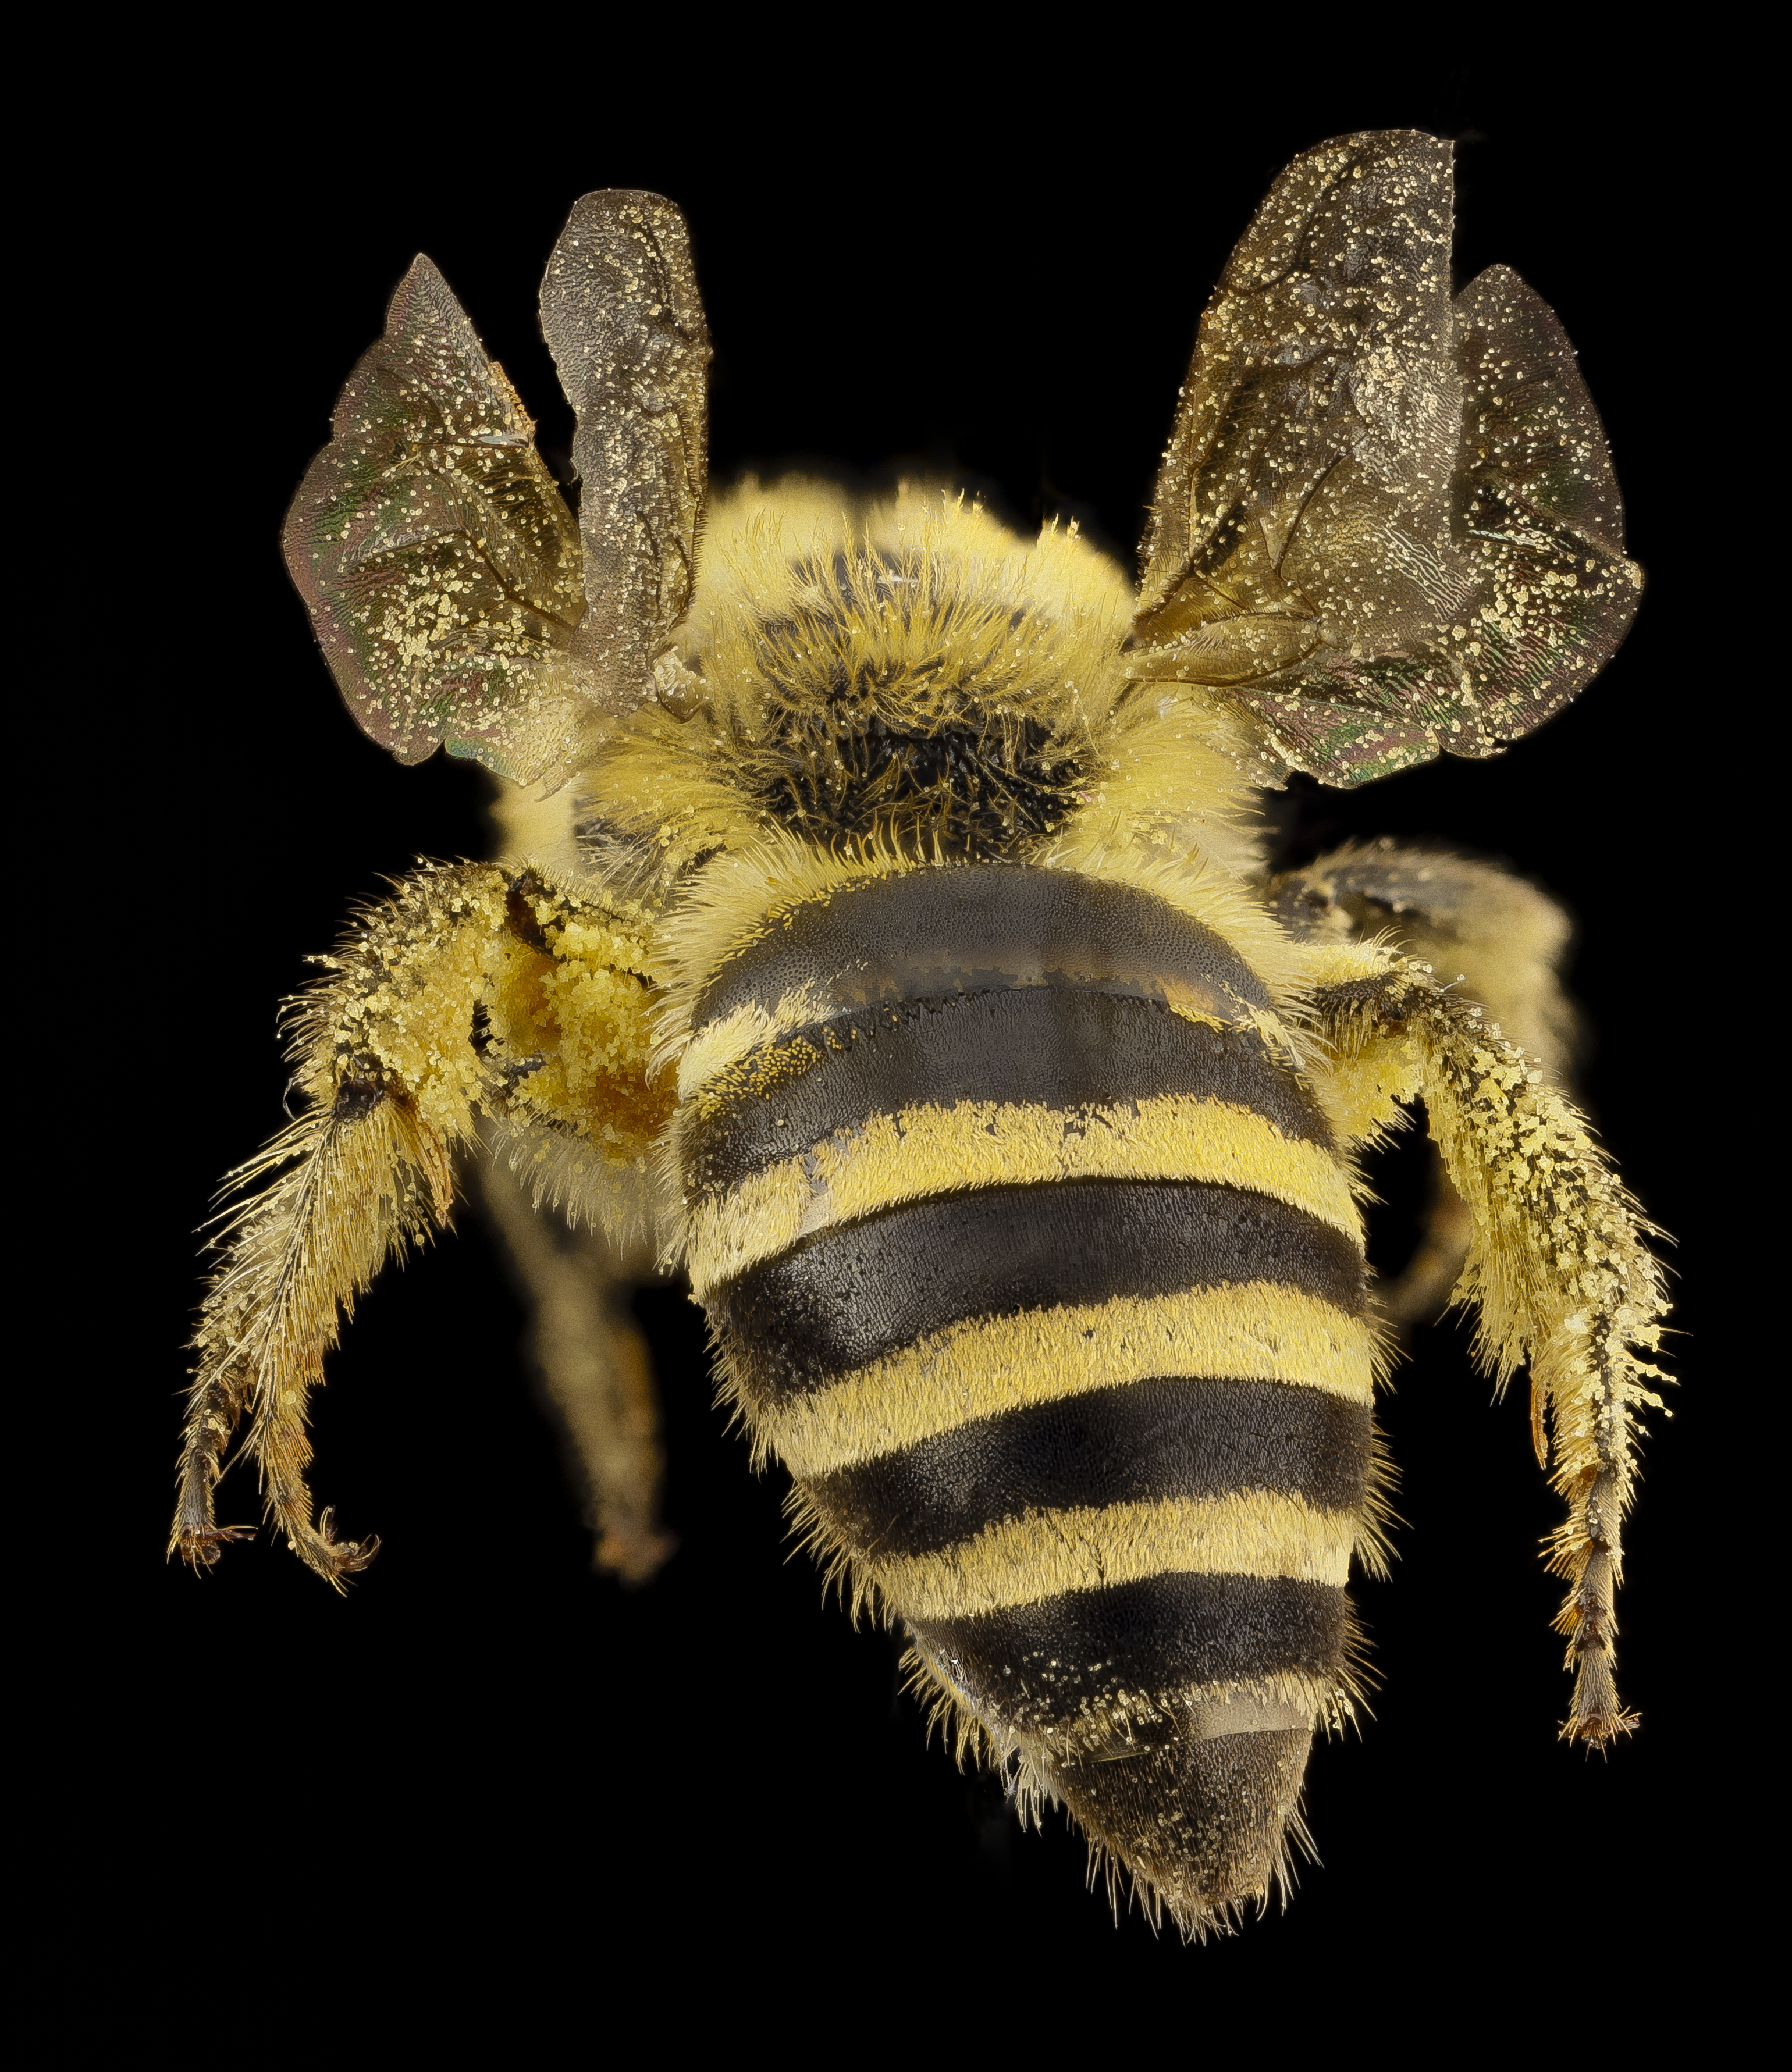 Colletes hederae, f, country unk, angle 2014-08-09-17.54.27 ZS PMax (14939760767)